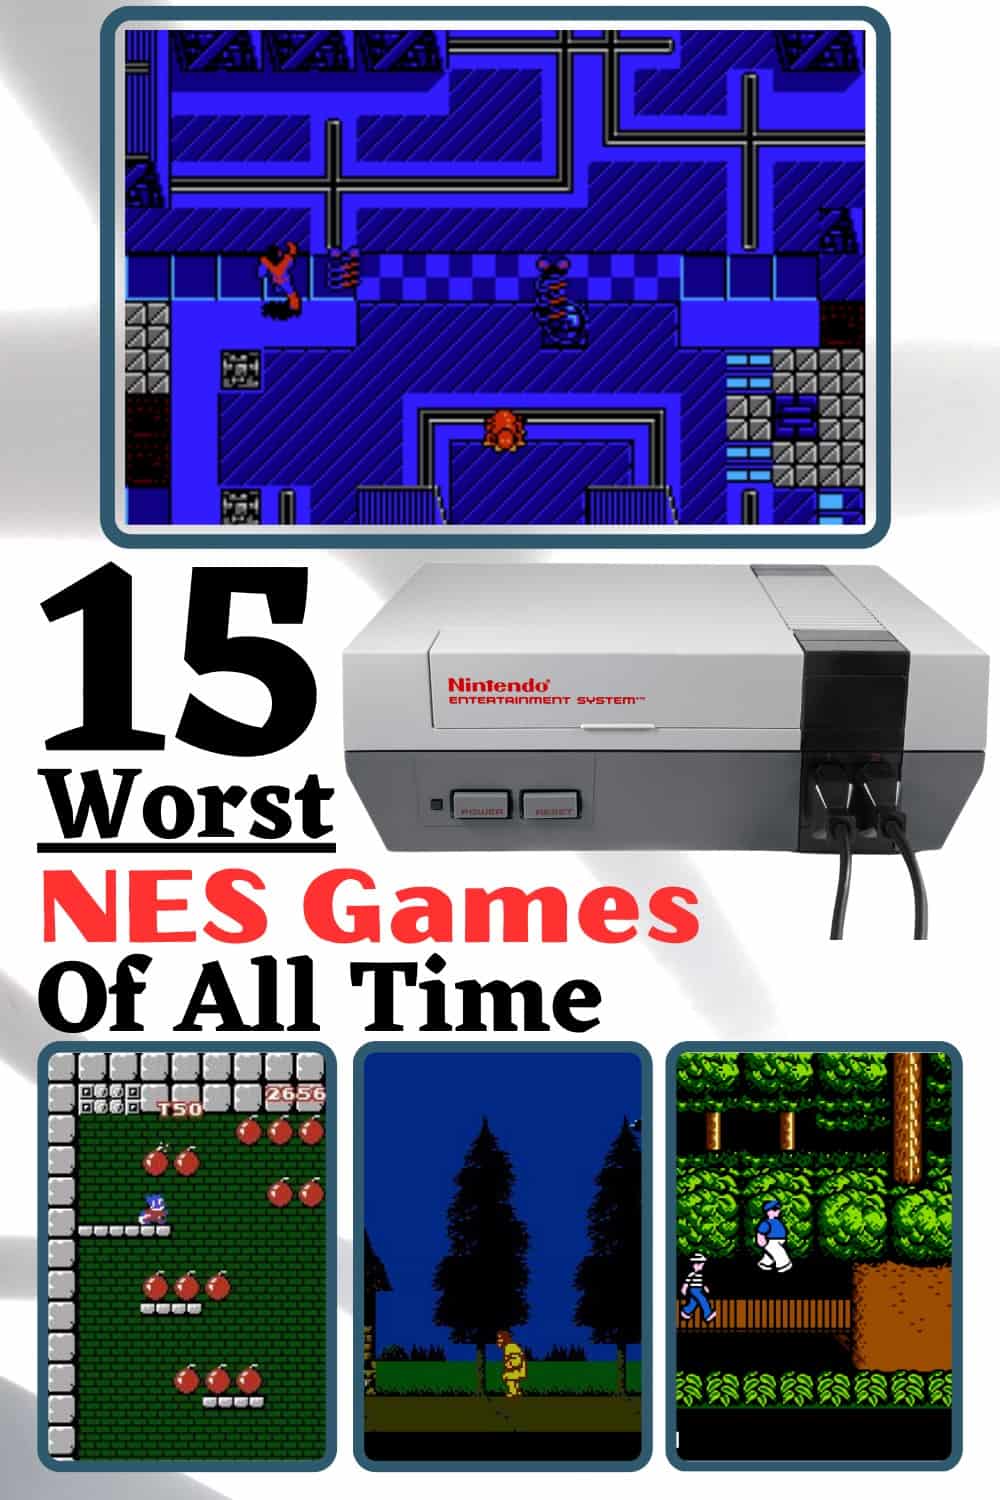 What is the worst NES game?